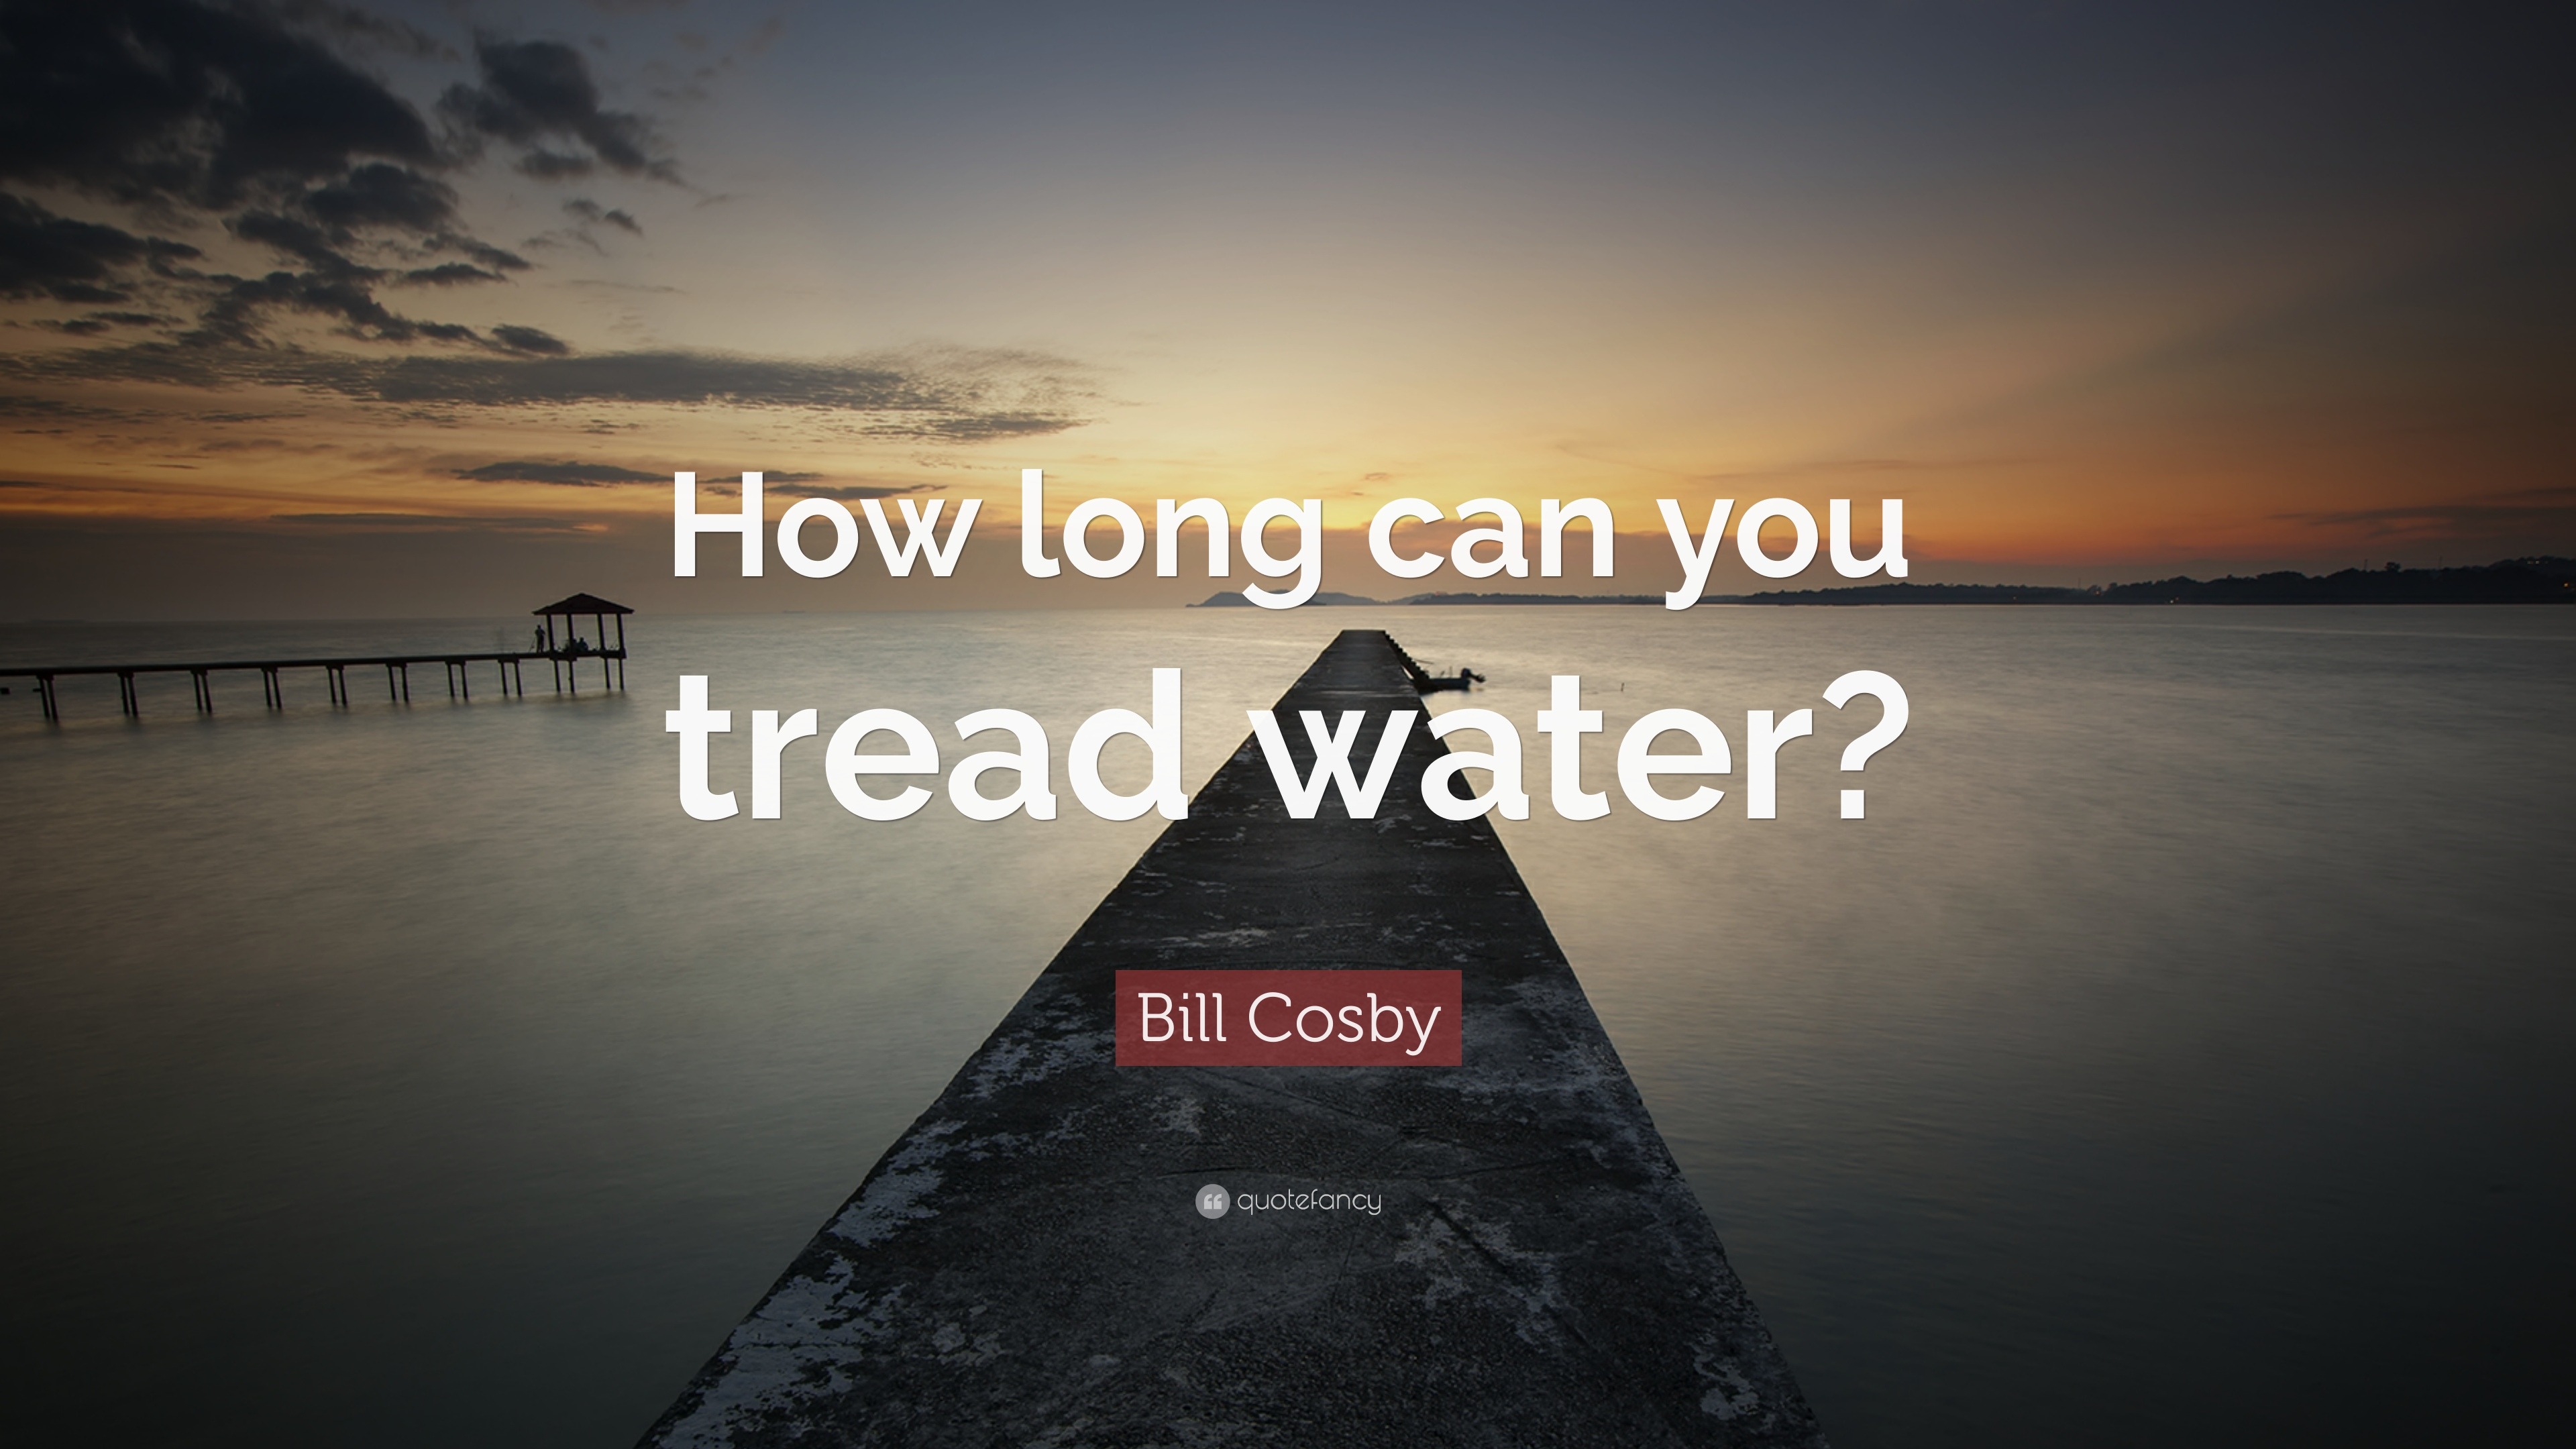 Bill Cosby Quote: "How long can you tread water?